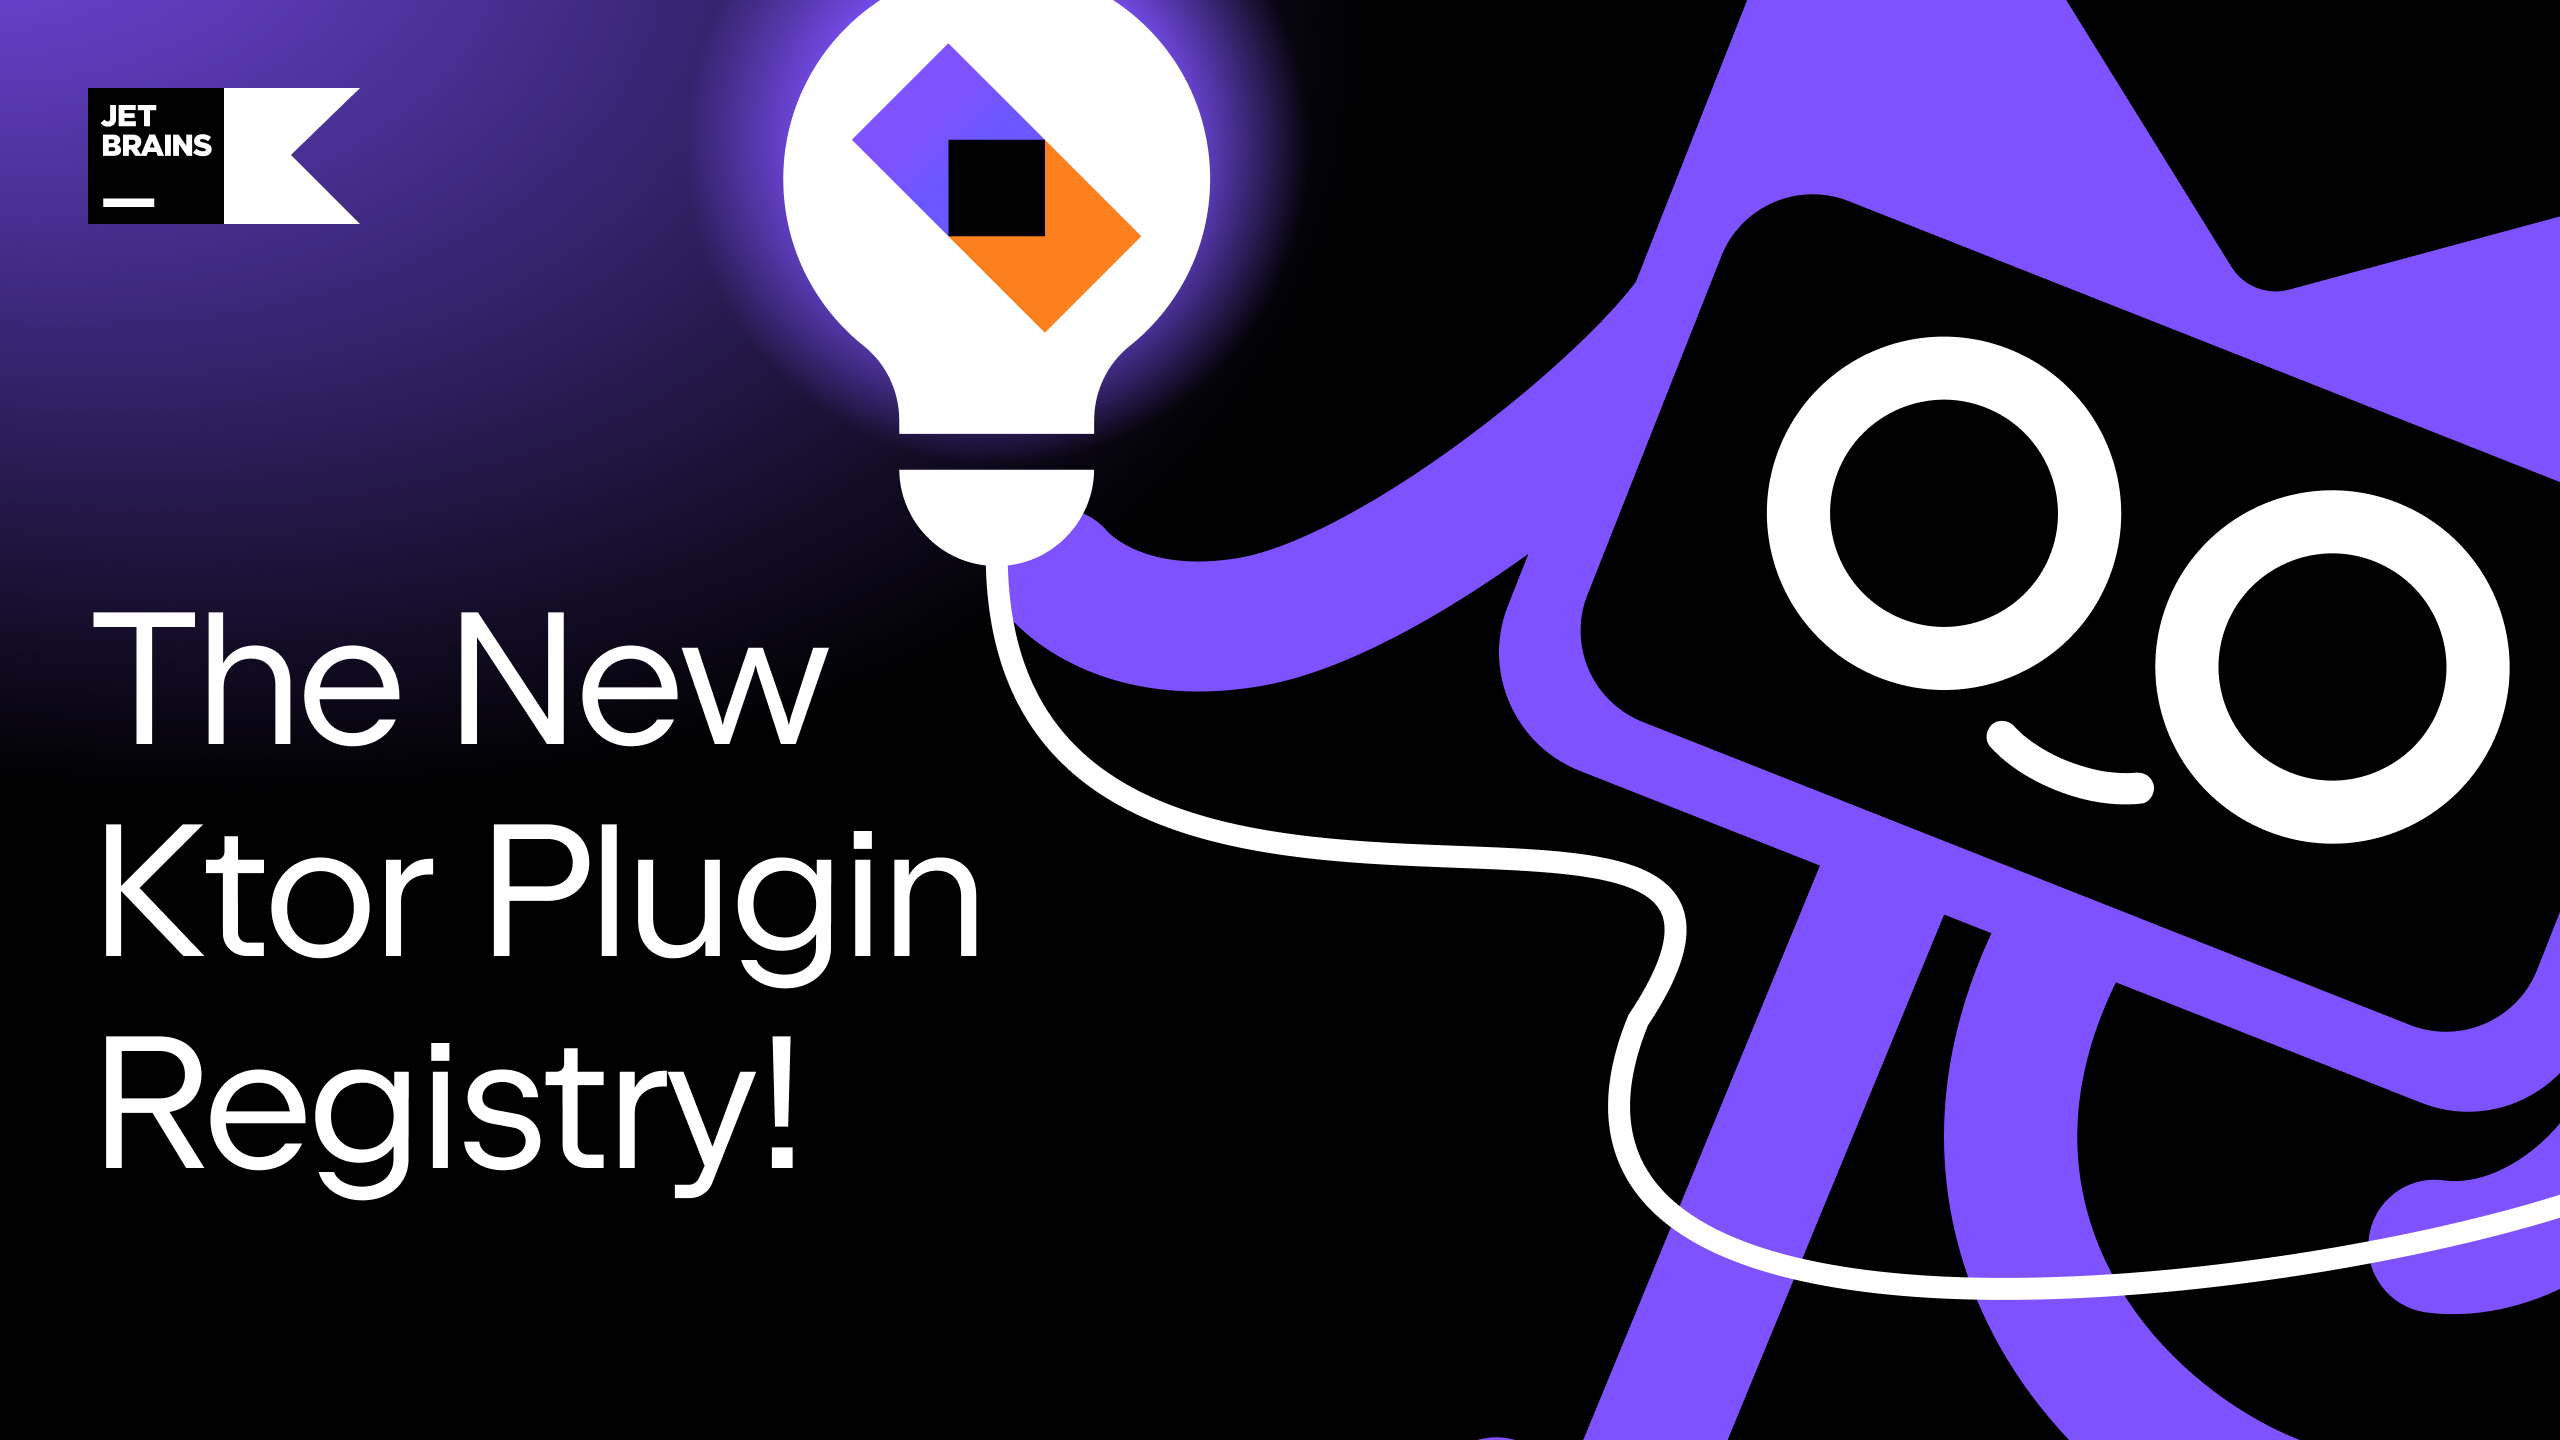 The Ktor Plugin Registry Has Launched